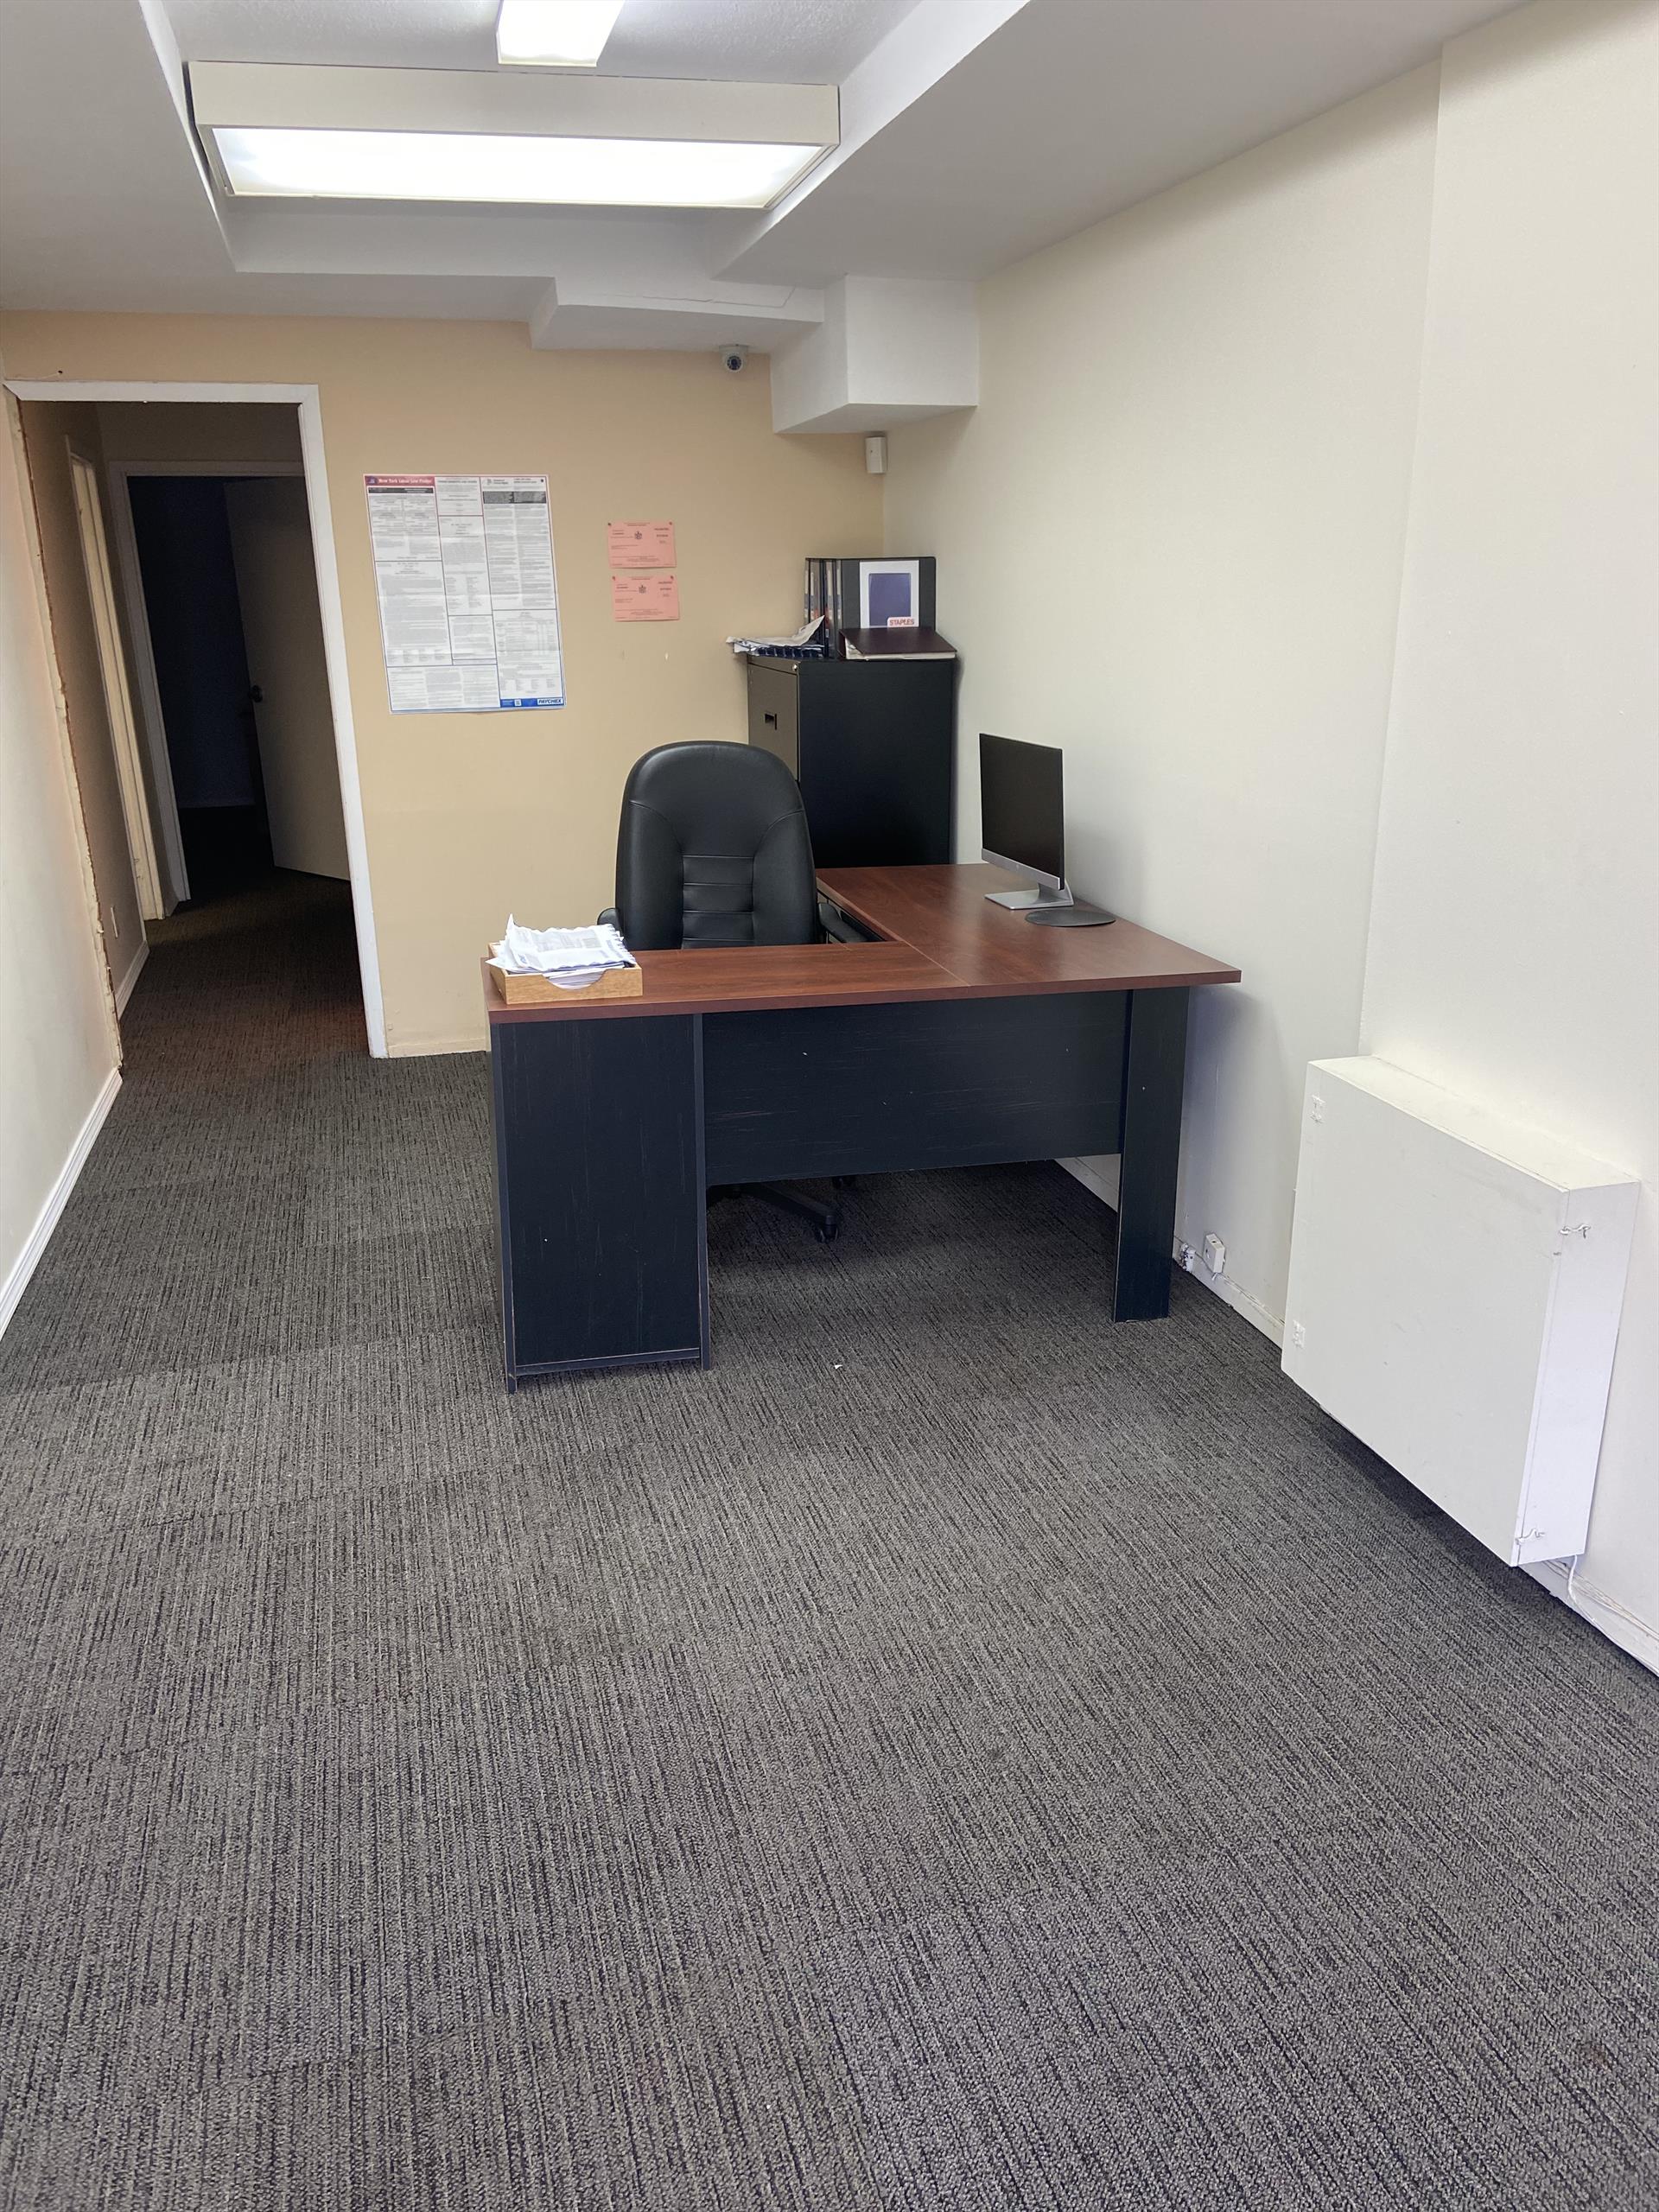 900 SqFt Office for Rent in Whitestone. Heat and Water is Included. Convenient to Transportation.